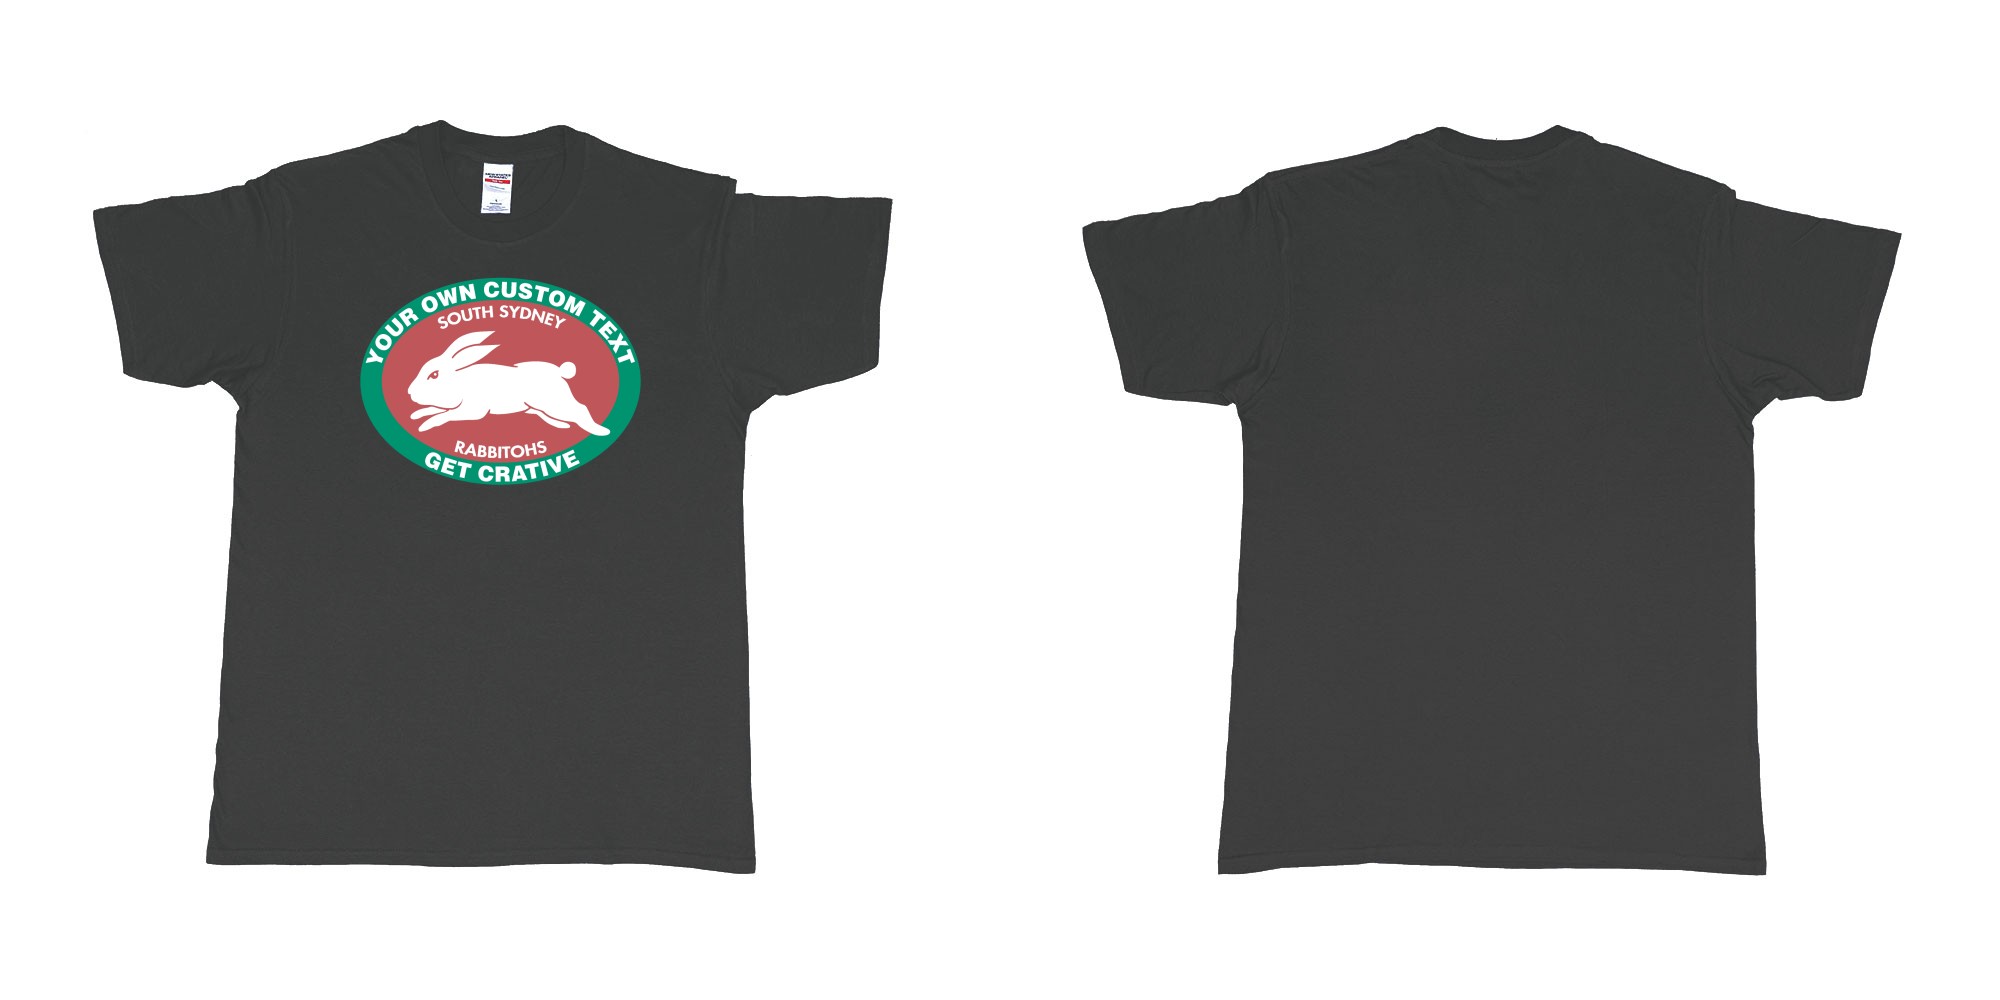 Custom tshirt design south sydney rabbitohs nrl custom print in fabric color black choice your own text made in Bali by The Pirate Way